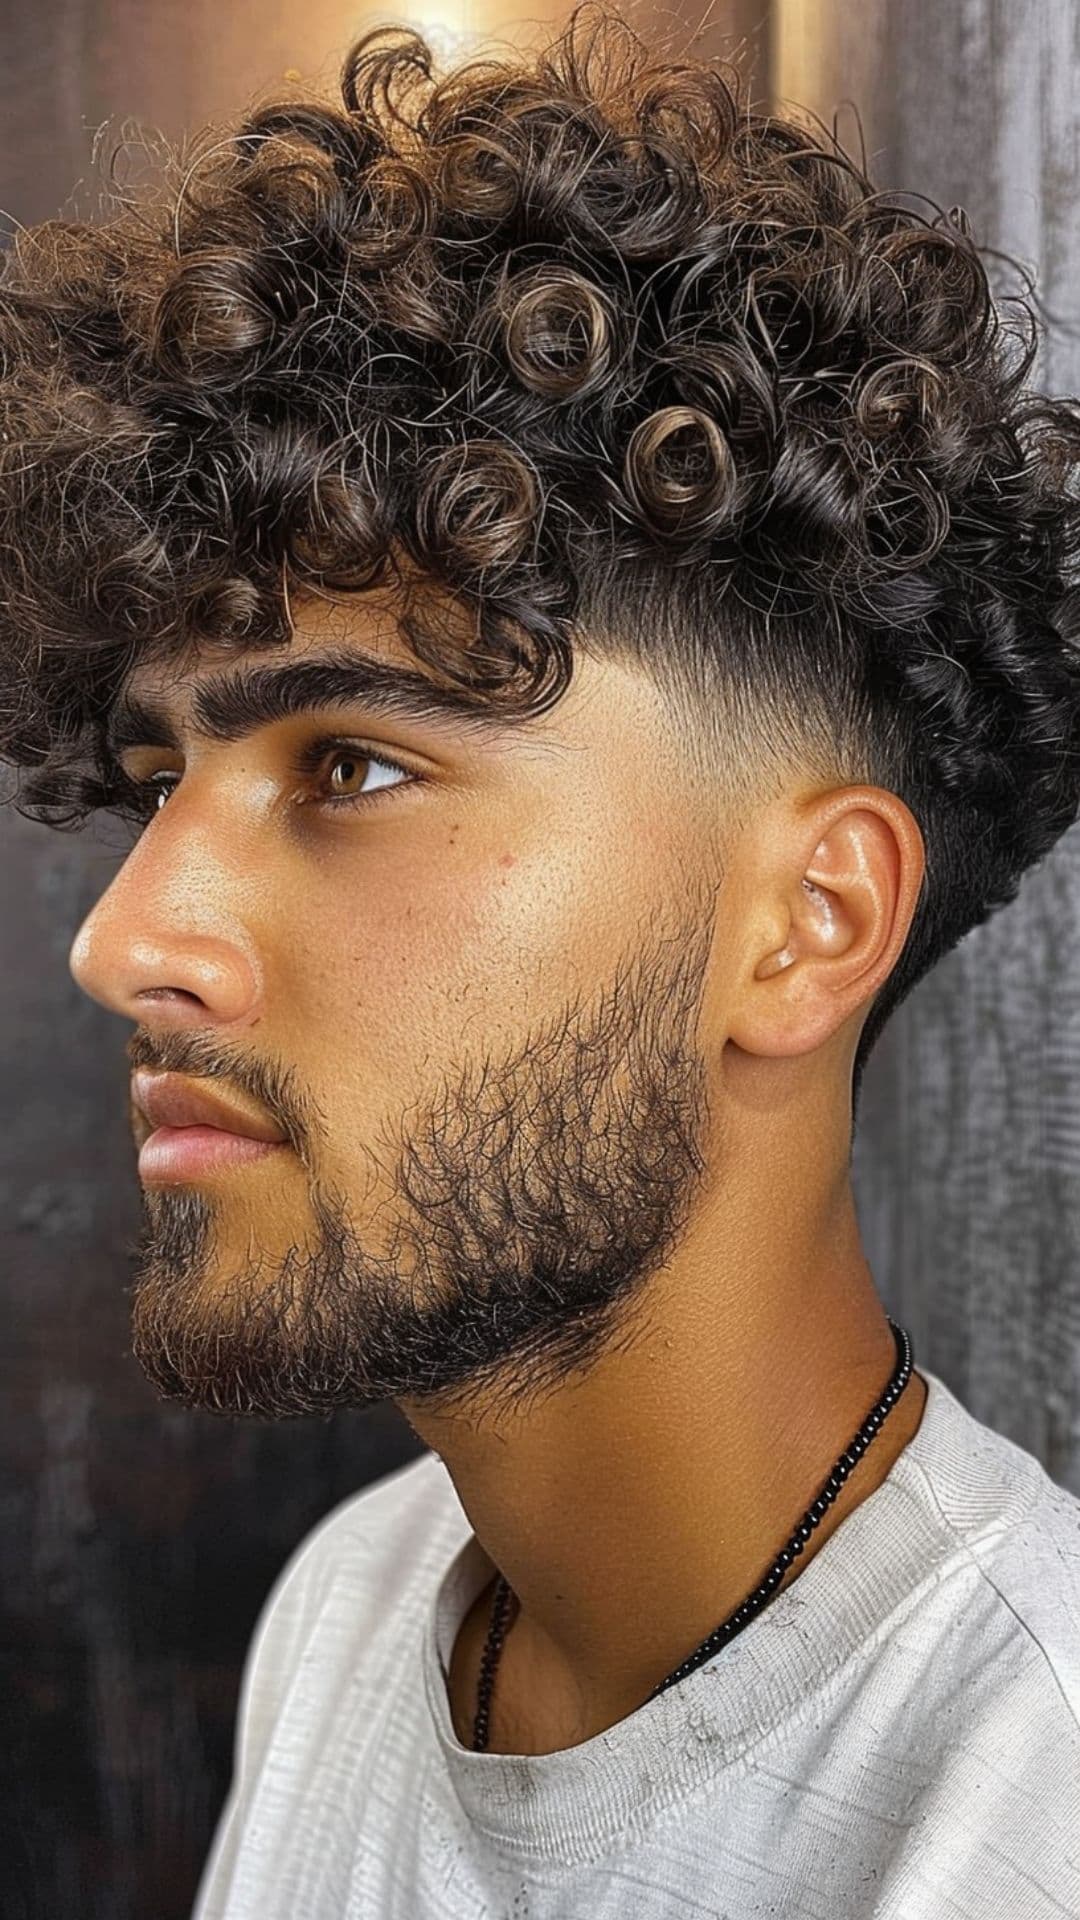 A man modelling a curly hair with temple fade hairstyle.